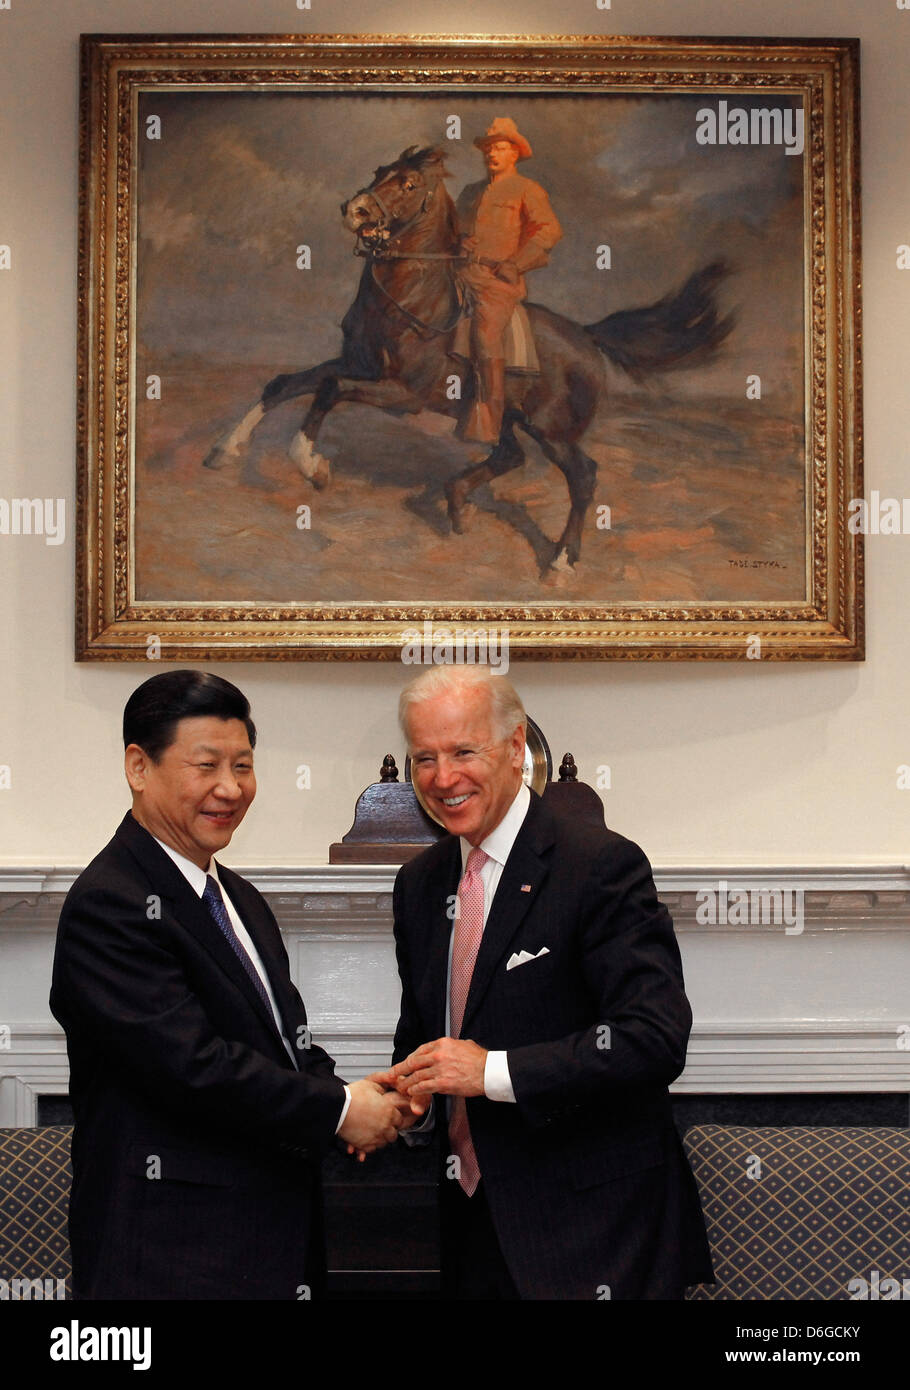 United States Vice President Joe Biden (R) and Vice President Xi Jinping of China hold an expanded bilateral meeting with other U.S. and Chinese officials in the Roosevelt Room at the White House February 14, 2012 in Washington, DC. While in Washington, Vice President Xi will meet with Biden, President Barack Obama and other senior Administration officials to discuss a broad range  Stock Photo